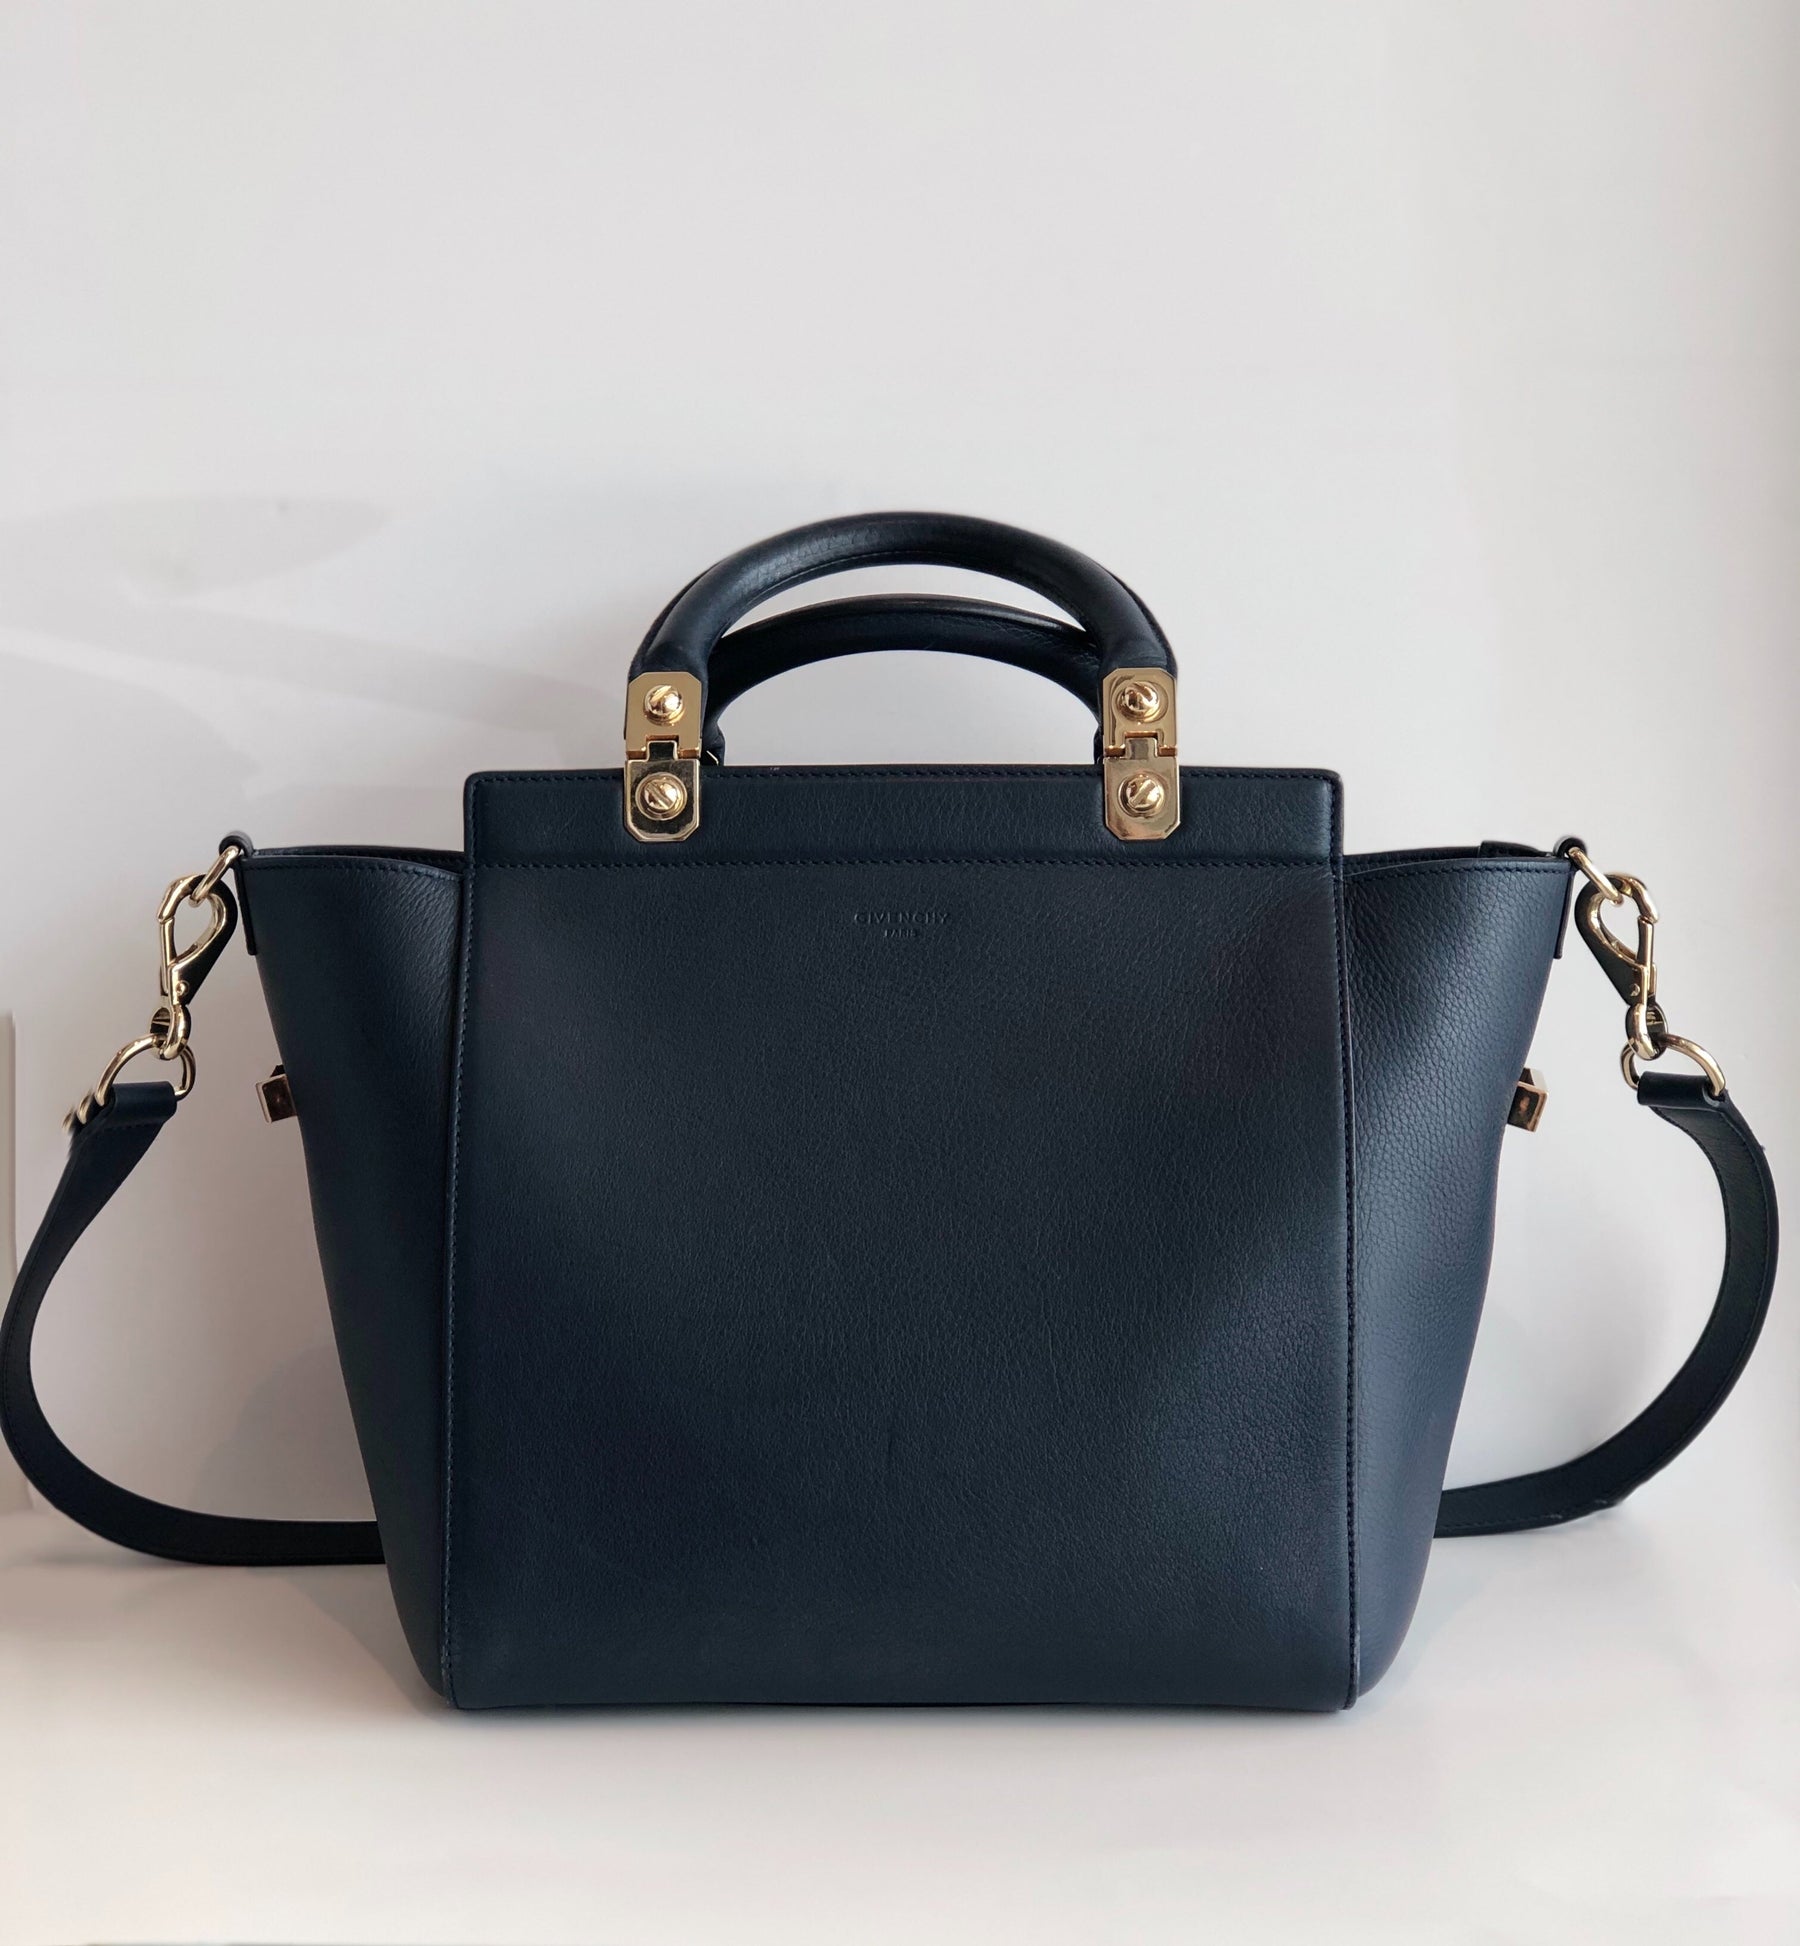 Givenchy HDG Top Handle Leather Tote Bag